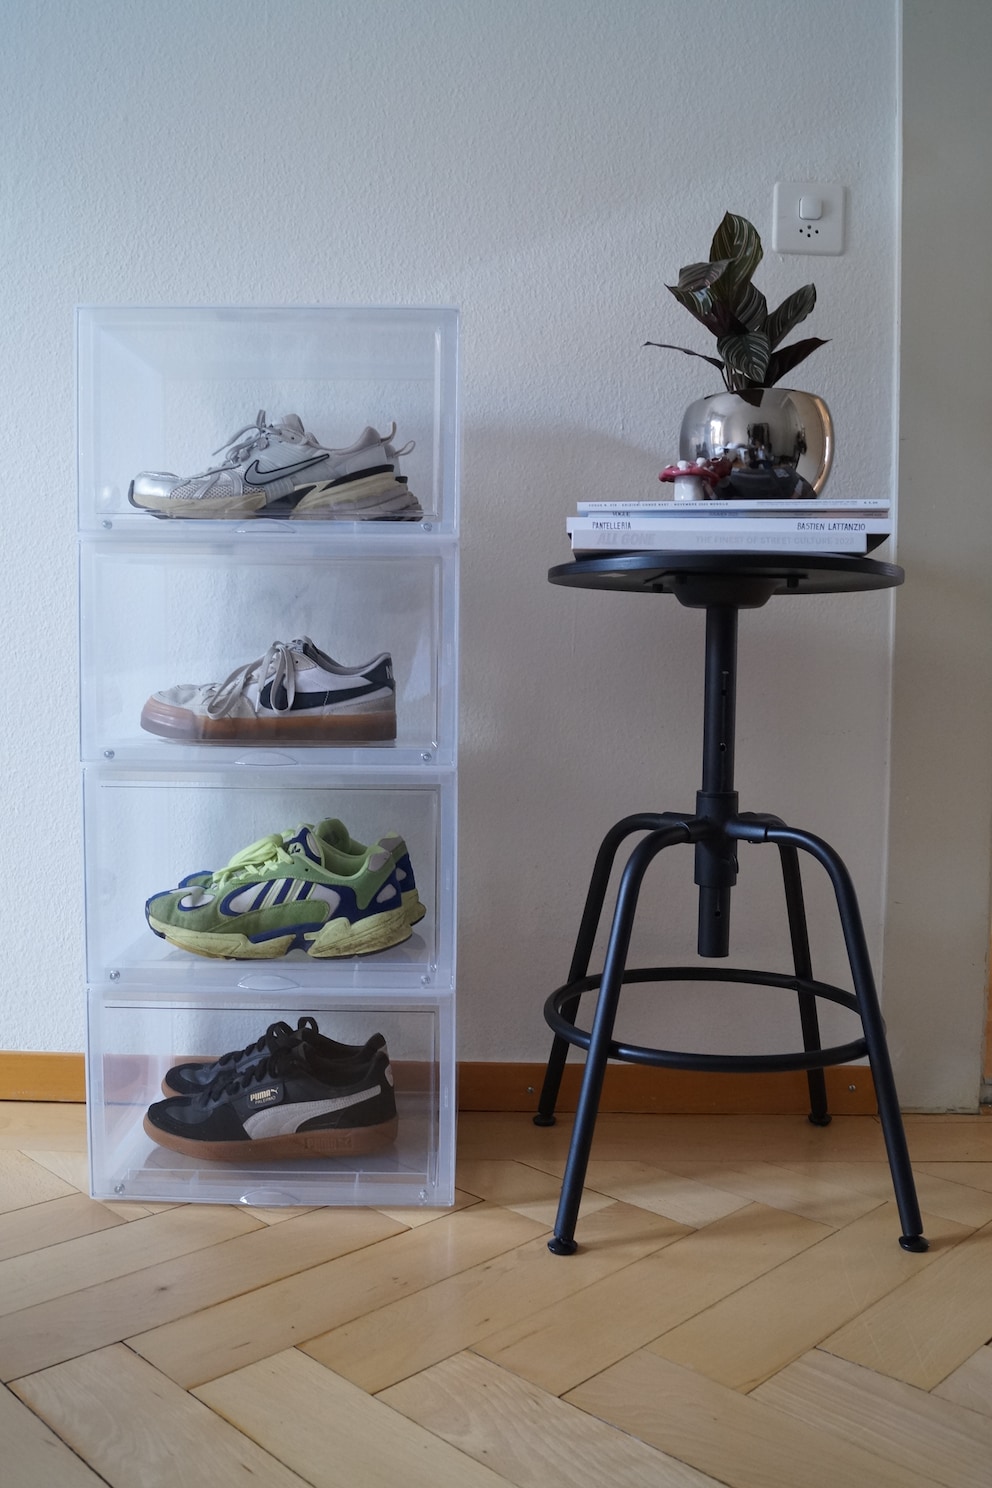 The cool sneaker museum for your home is ready.